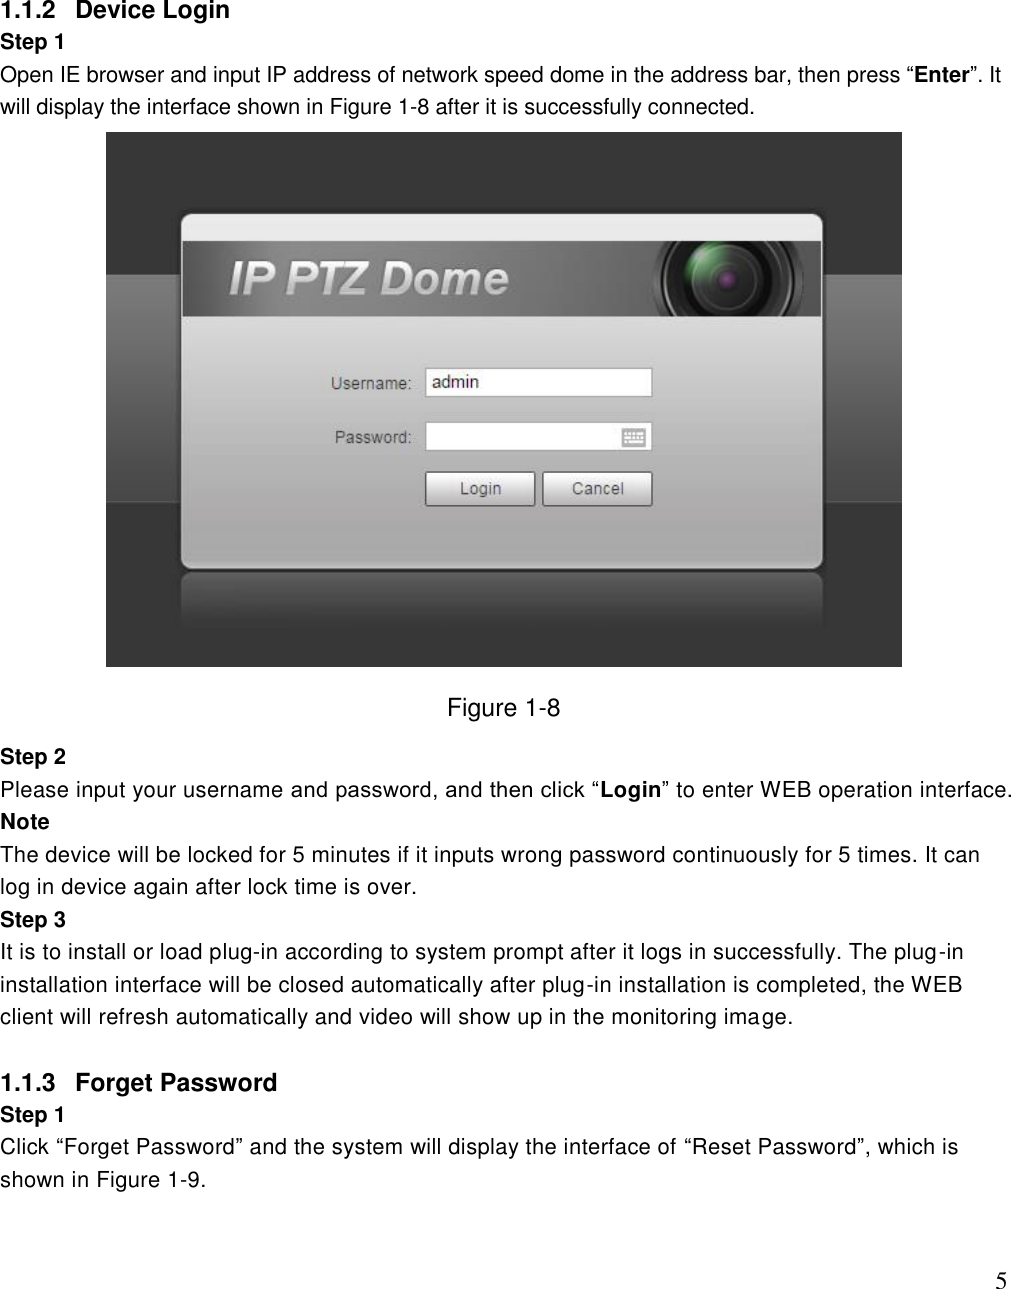                                                                              5 1.1.2  Device Login Step 1  Open IE browser and input IP address of network speed dome in the address bar, then press “Enter”. It will display the interface shown in Figure 1-8 after it is successfully connected.   Figure 1-8 Step 2  Please input your username and password, and then click “Login” to enter WEB operation interface. Note The device will be locked for 5 minutes if it inputs wrong password continuously for 5 times. It can log in device again after lock time is over. Step 3  It is to install or load plug-in according to system prompt after it logs in successfully. The plug-in installation interface will be closed automatically after plug-in installation is completed, the WEB client will refresh automatically and video will show up in the monitoring image.  1.1.3  Forget Password Step 1 Click “Forget Password” and the system will display the interface of “Reset Password”, which is shown in Figure 1-9. 